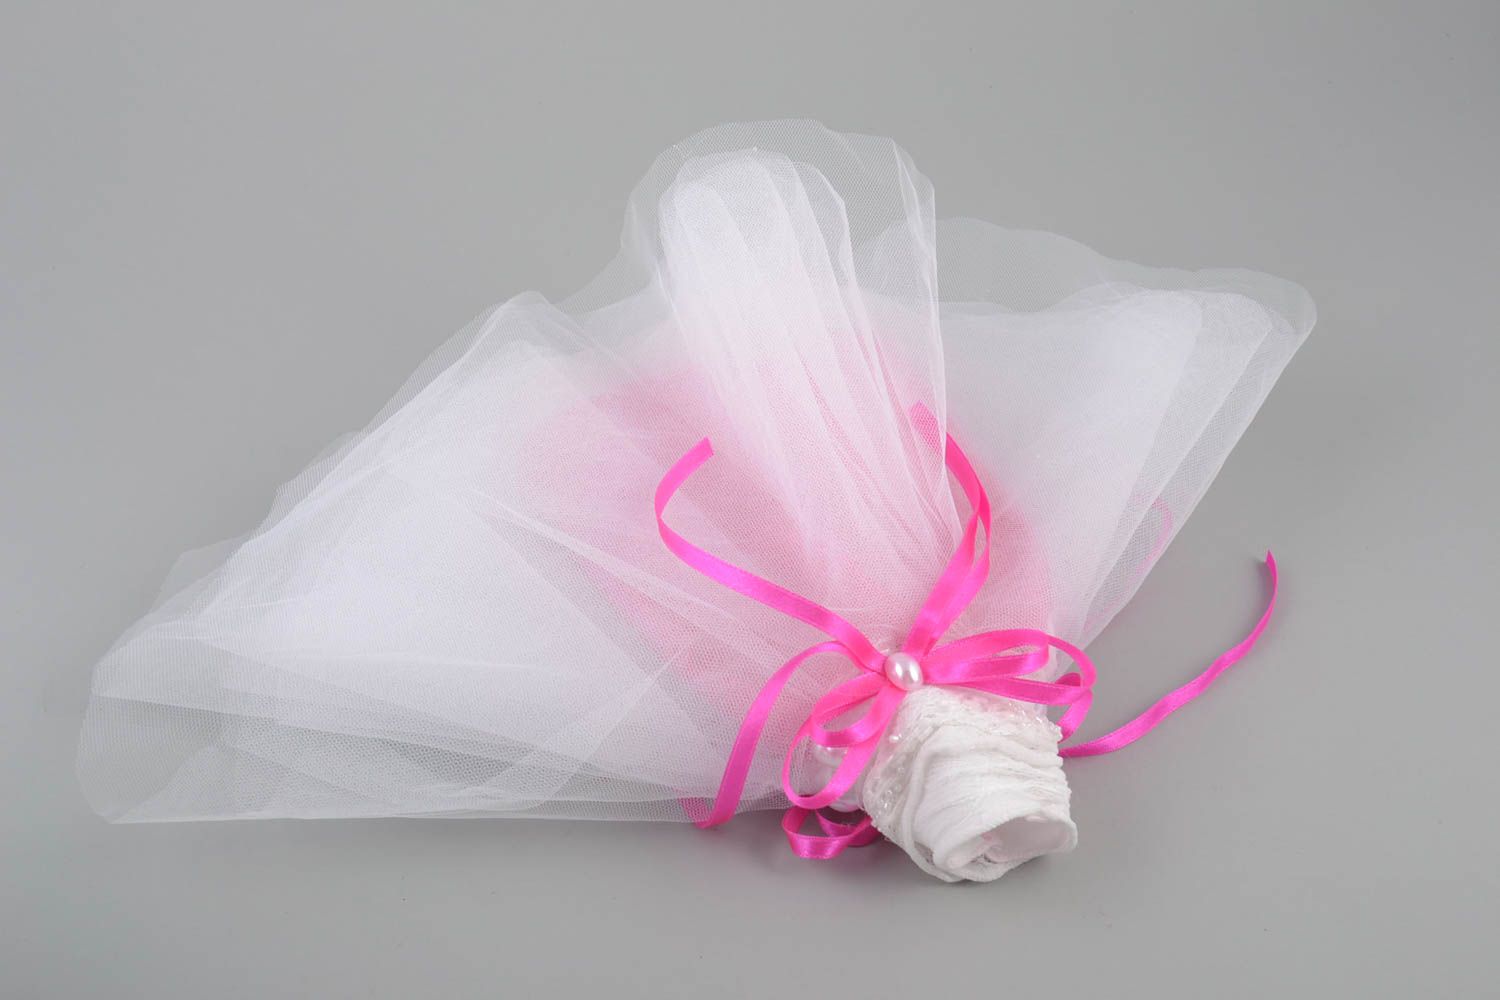 Bride's clothes for bottle of champagne tender wedding accessory in light shades photo 2